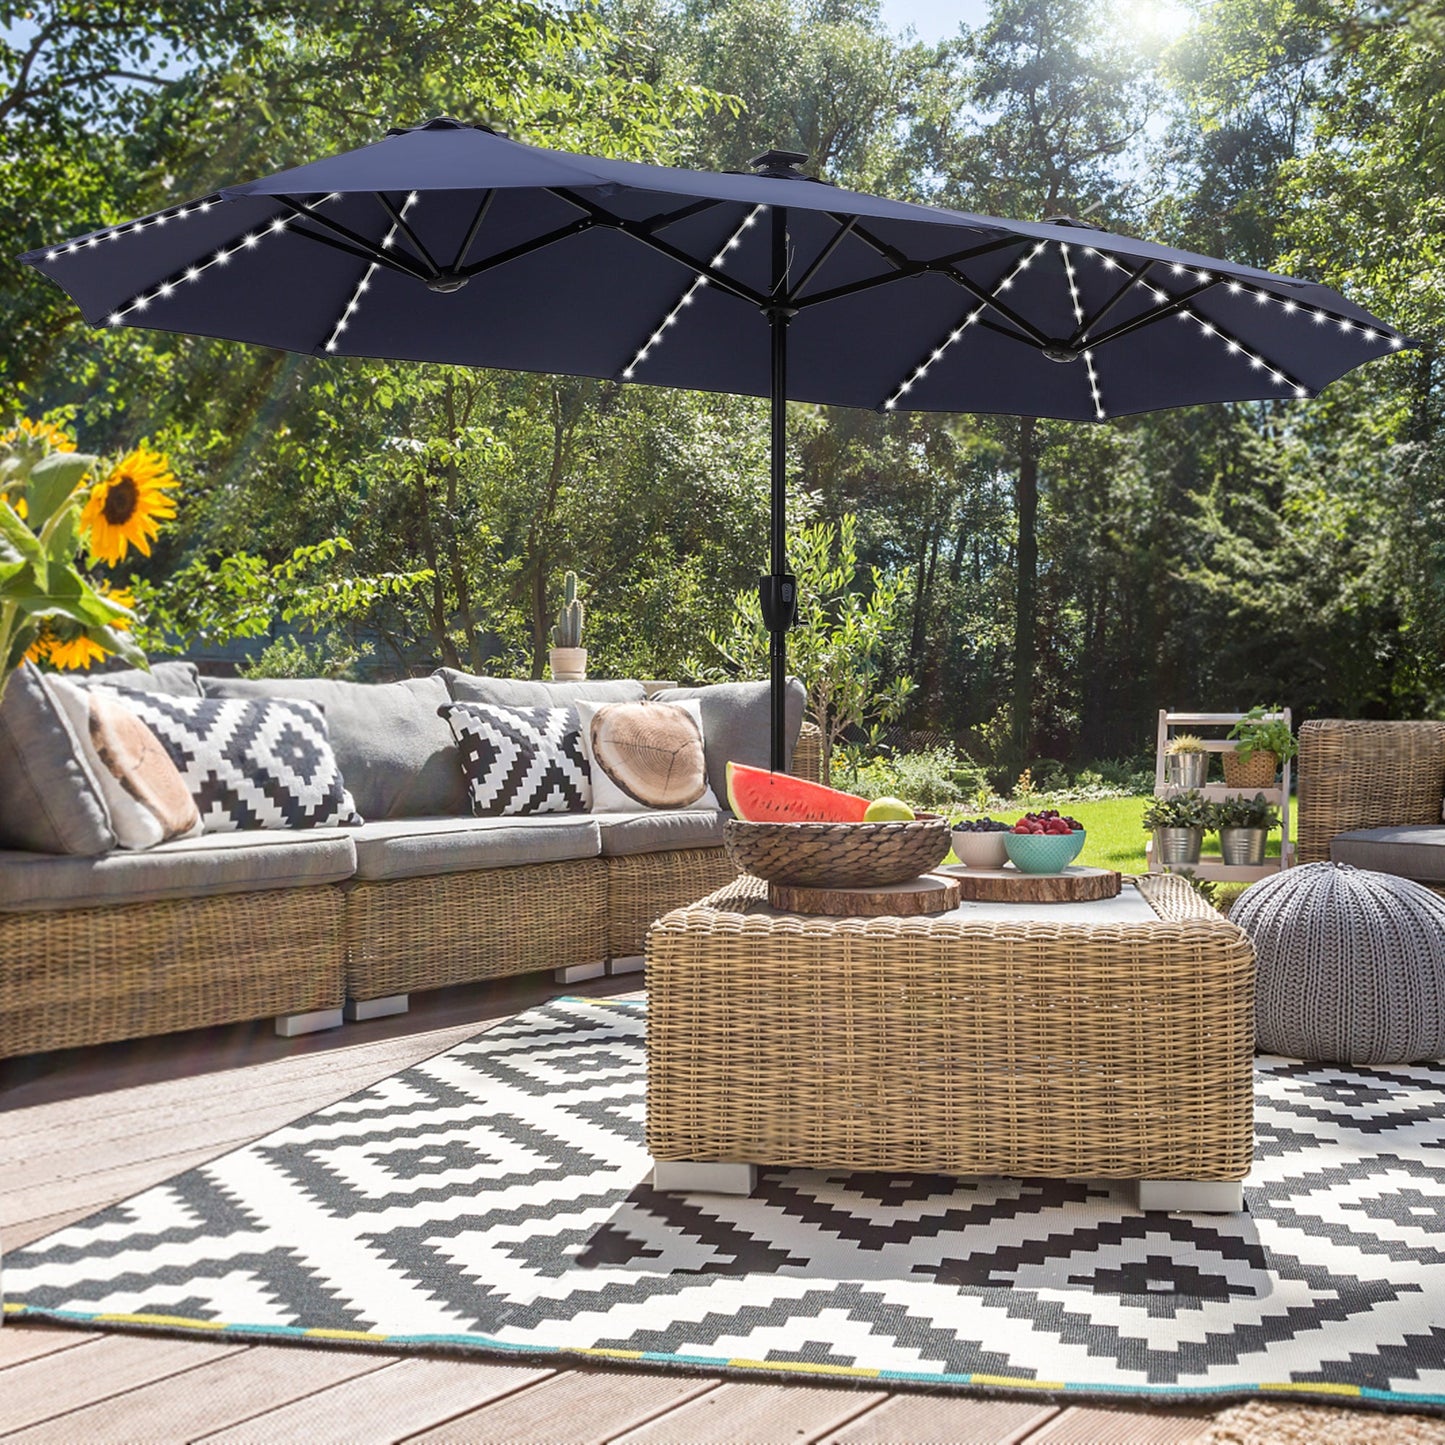 Alpha Joy 13ft Large Double-Sided Outdoor Patio Umbrella with Colorful Solar Lights, Navy Blue